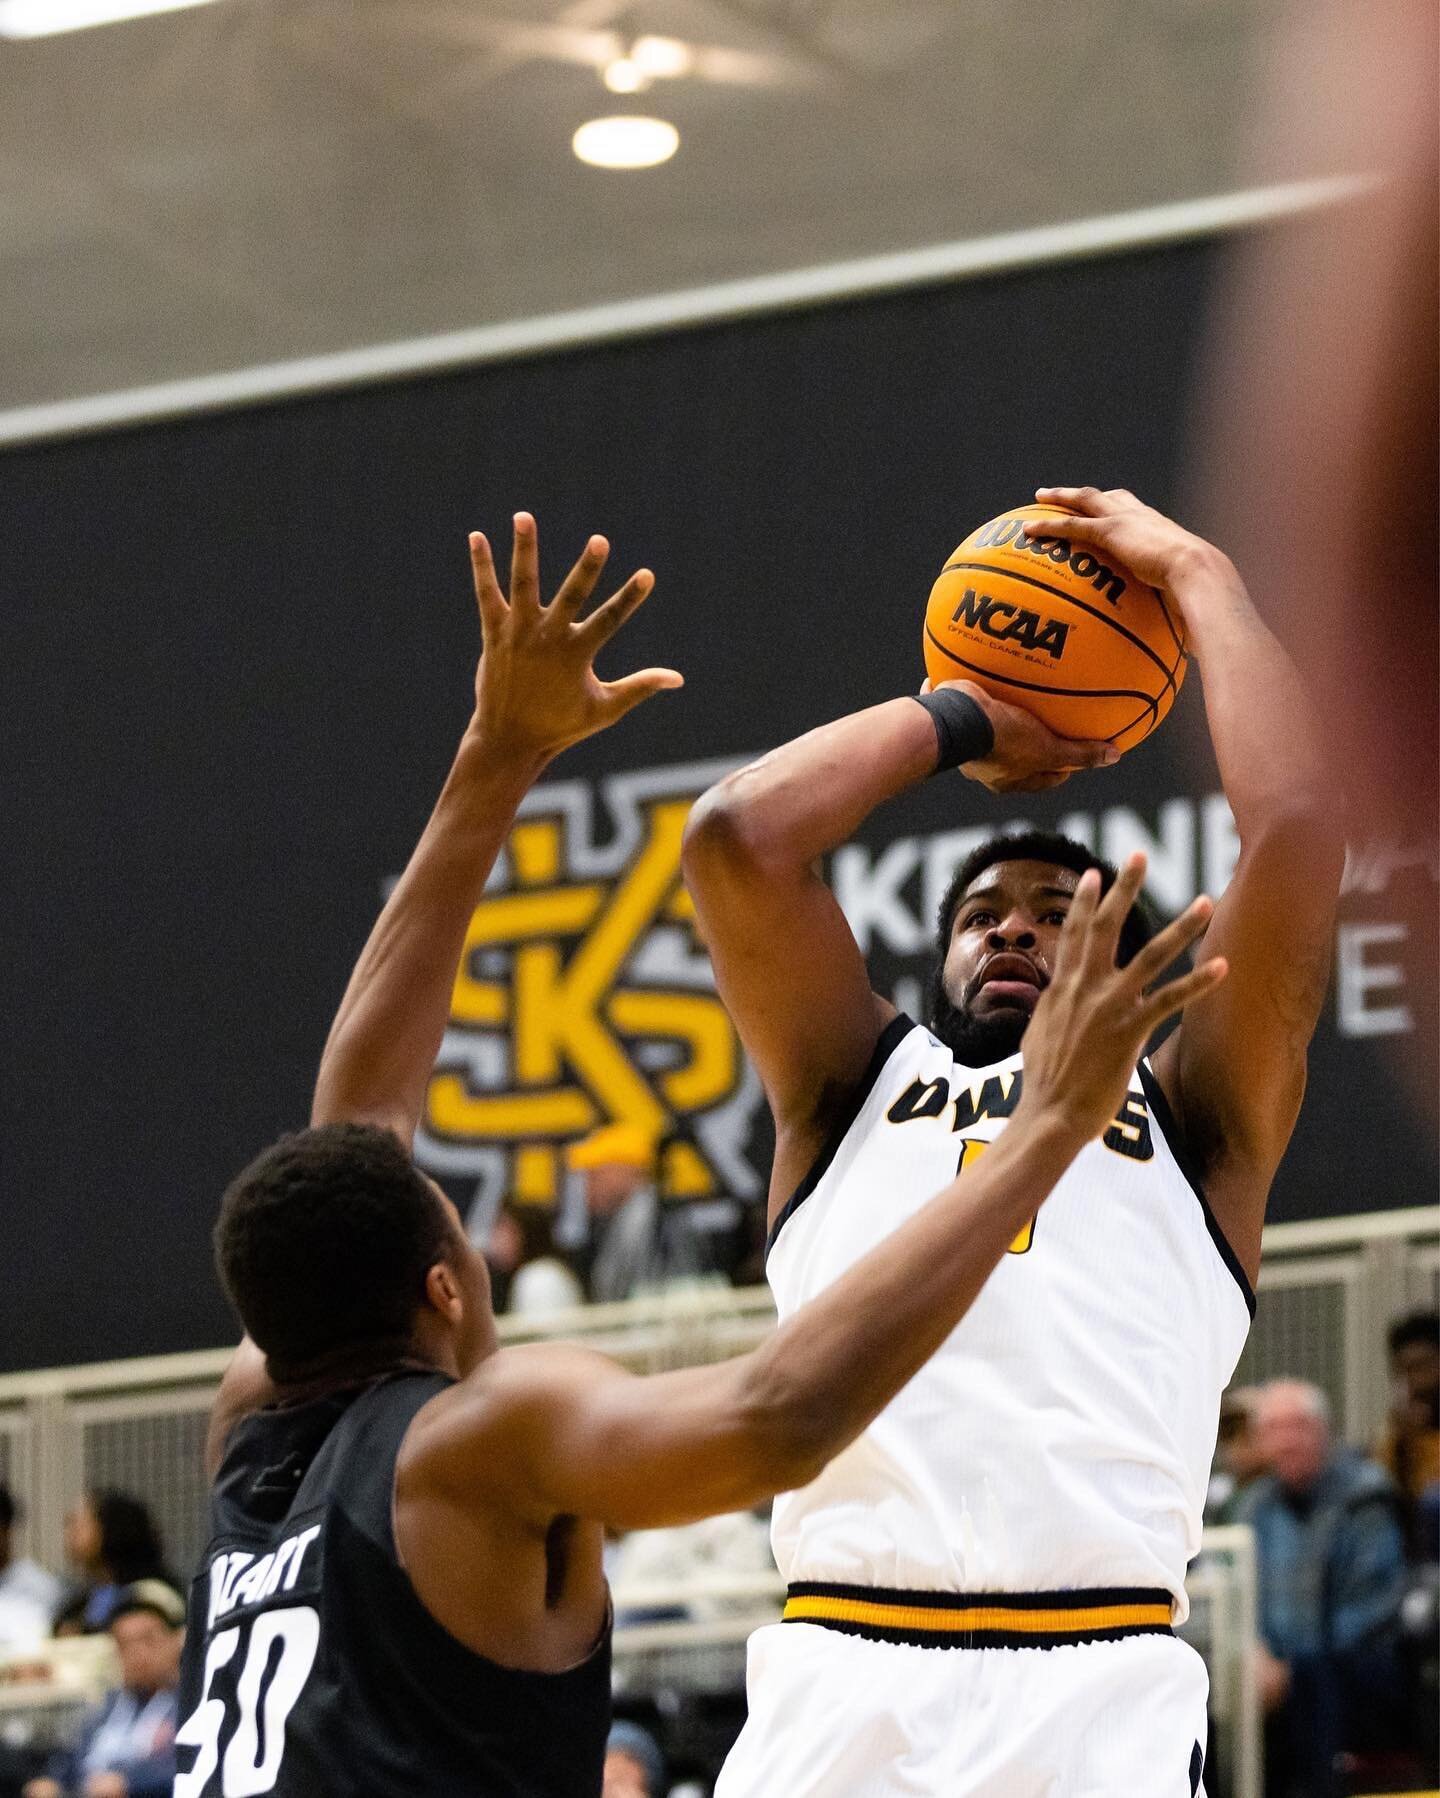 Kennesaw State Owls Men's Basketball continues the 8 home game win streak by beating Eastern
Kentucky 79 - 75.
&bull;
Kennesaw State moves to 2-0 in ASUN play and 10-5 on the season.
&bull;
[Hunter D. Cone // KSU Athletics]